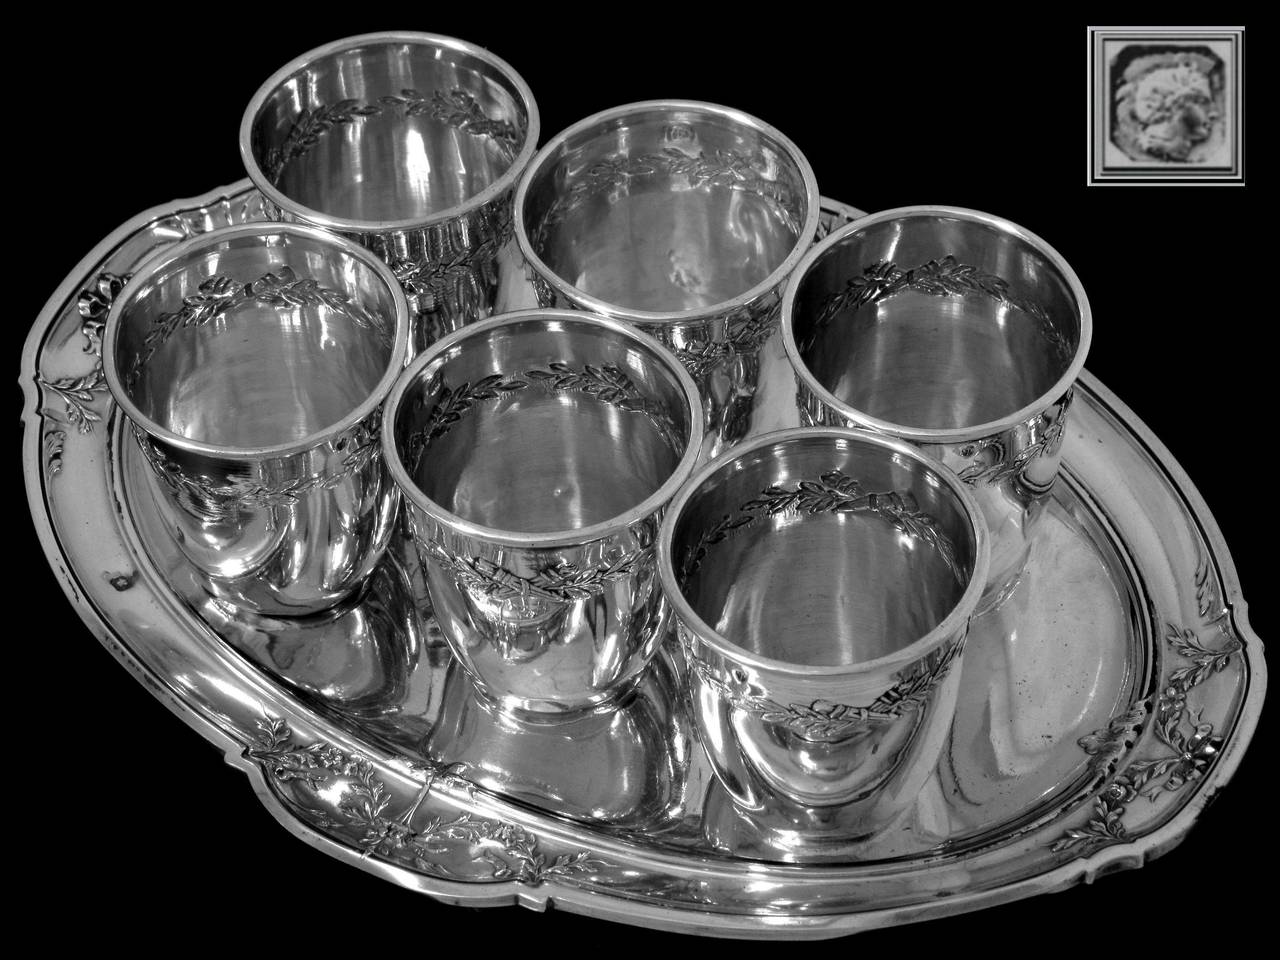 BERGERON French All Sterling Silver Liquor Cups 6 pc w/Tray Louis XVI

Head of Minerve 1 st titre on the liquor cups and on the tray for 950/1000 French Sterling Silver guarantee

A rare french sterling silver liquor set 7 pc with Louis XVI